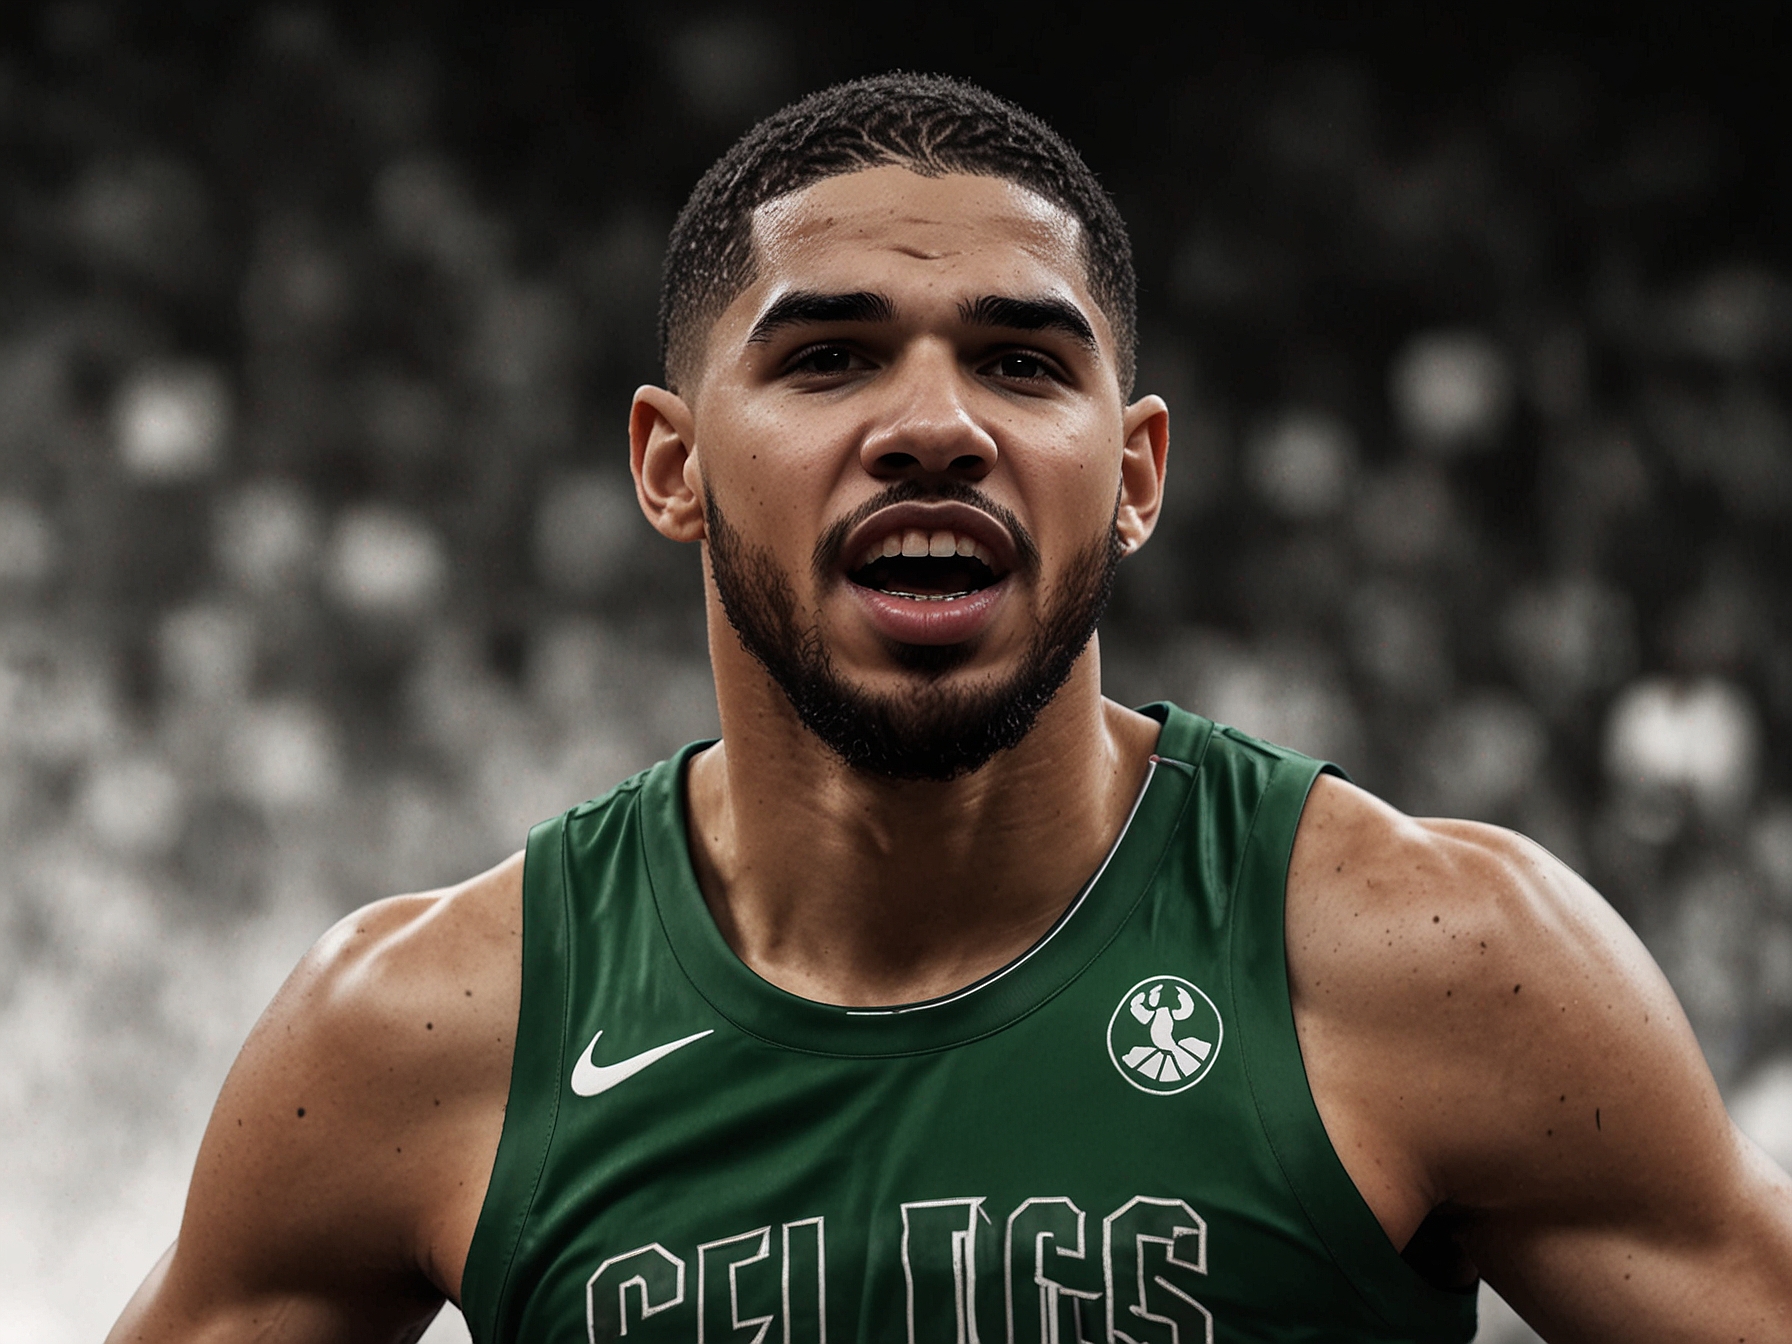 Boston Celtics' Jayson Tatum driving to the basket with a determined expression, capturing his game-winning performance against the Dallas Mavericks in the NBA Finals.